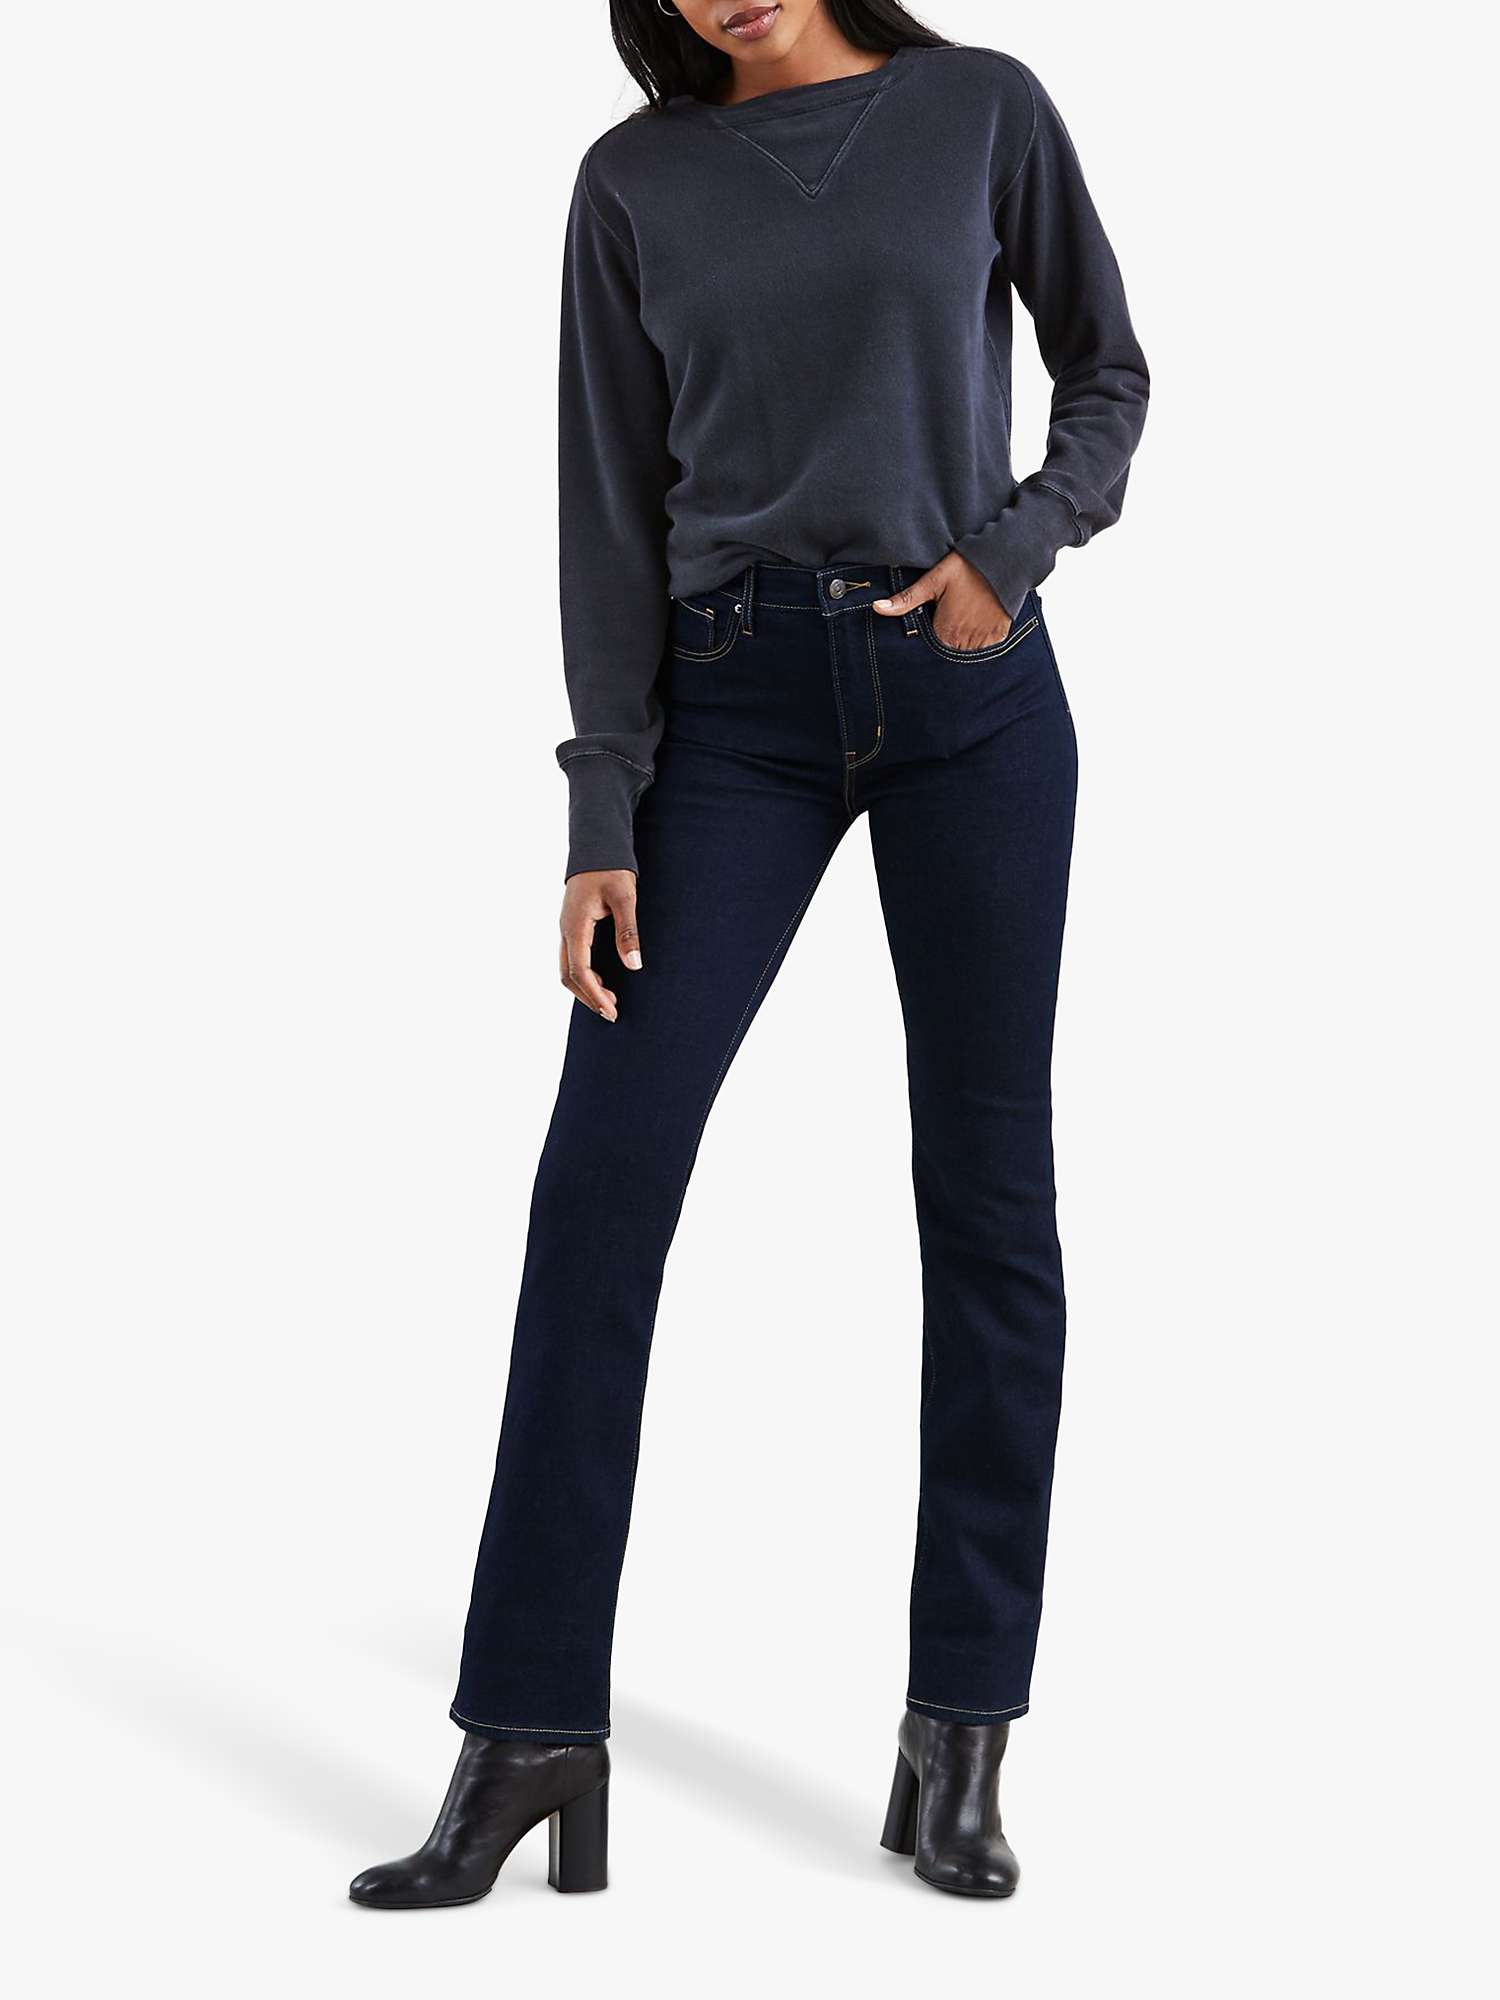 Buy Levi's 724 High Rise Straight Cut Jeans, To The Nine Online at johnlewis.com